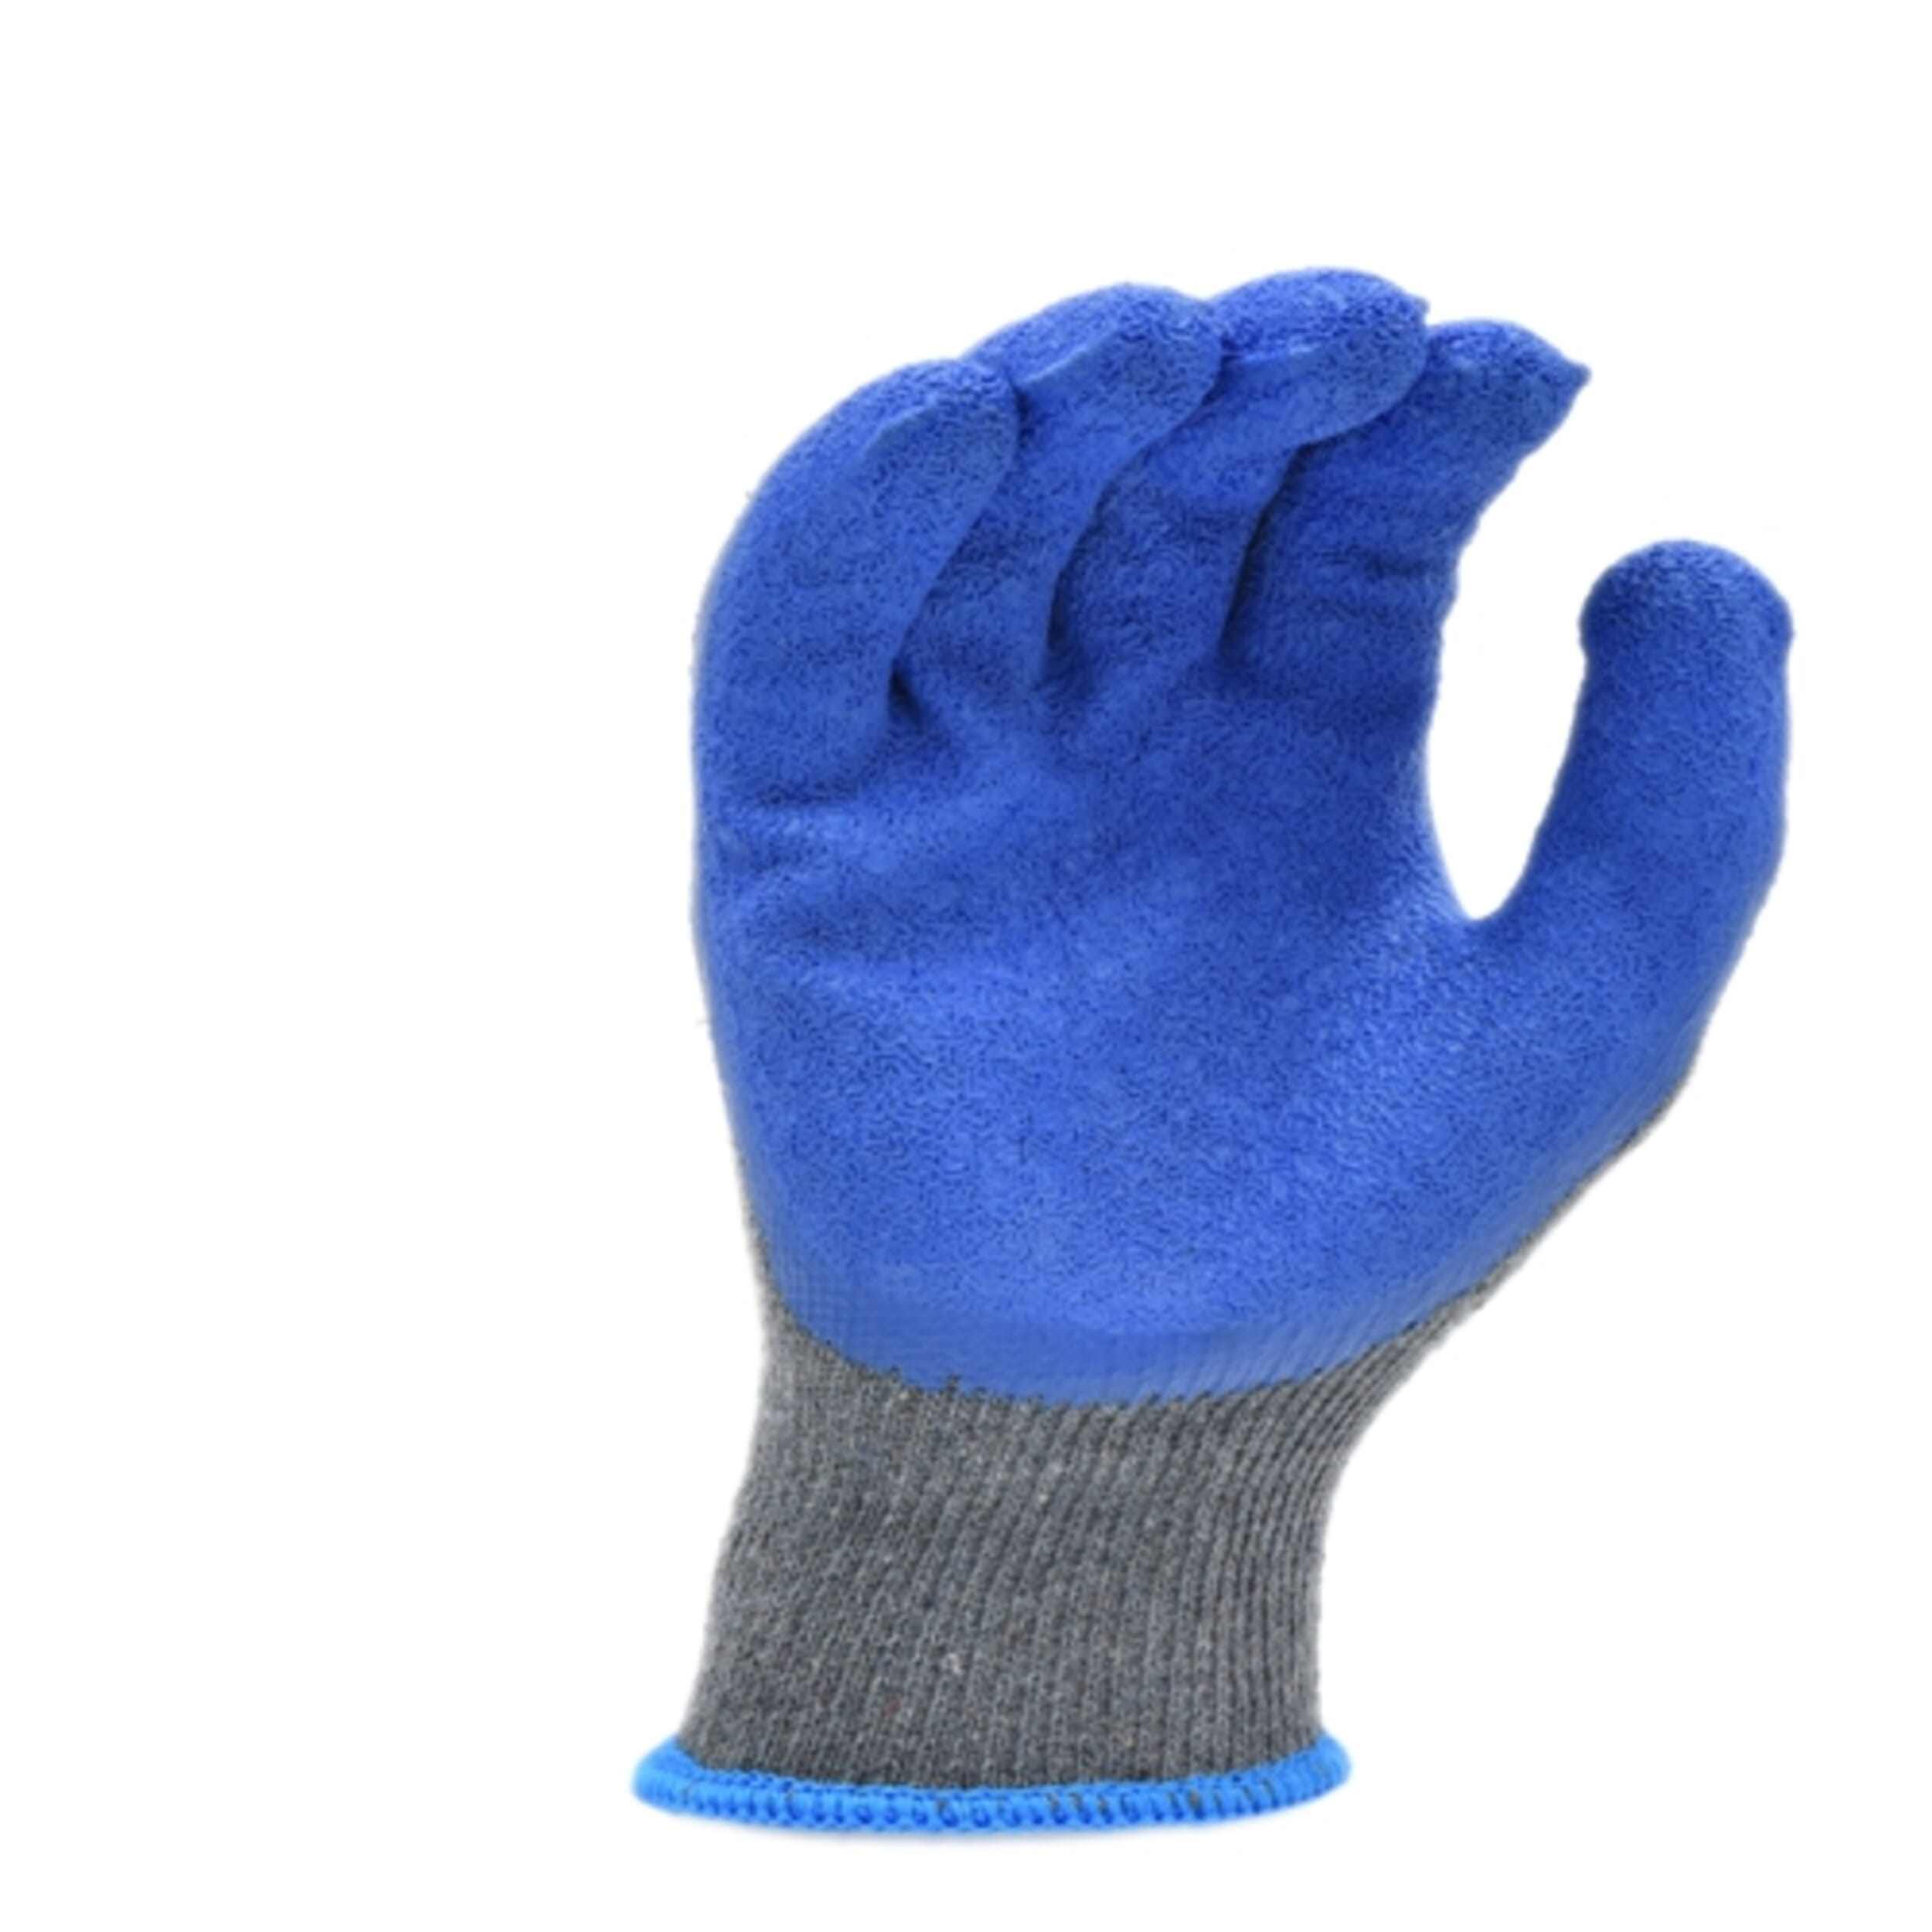 G & F Knit Work Safety Gloves, Textured Rubber Latex Coated, 12